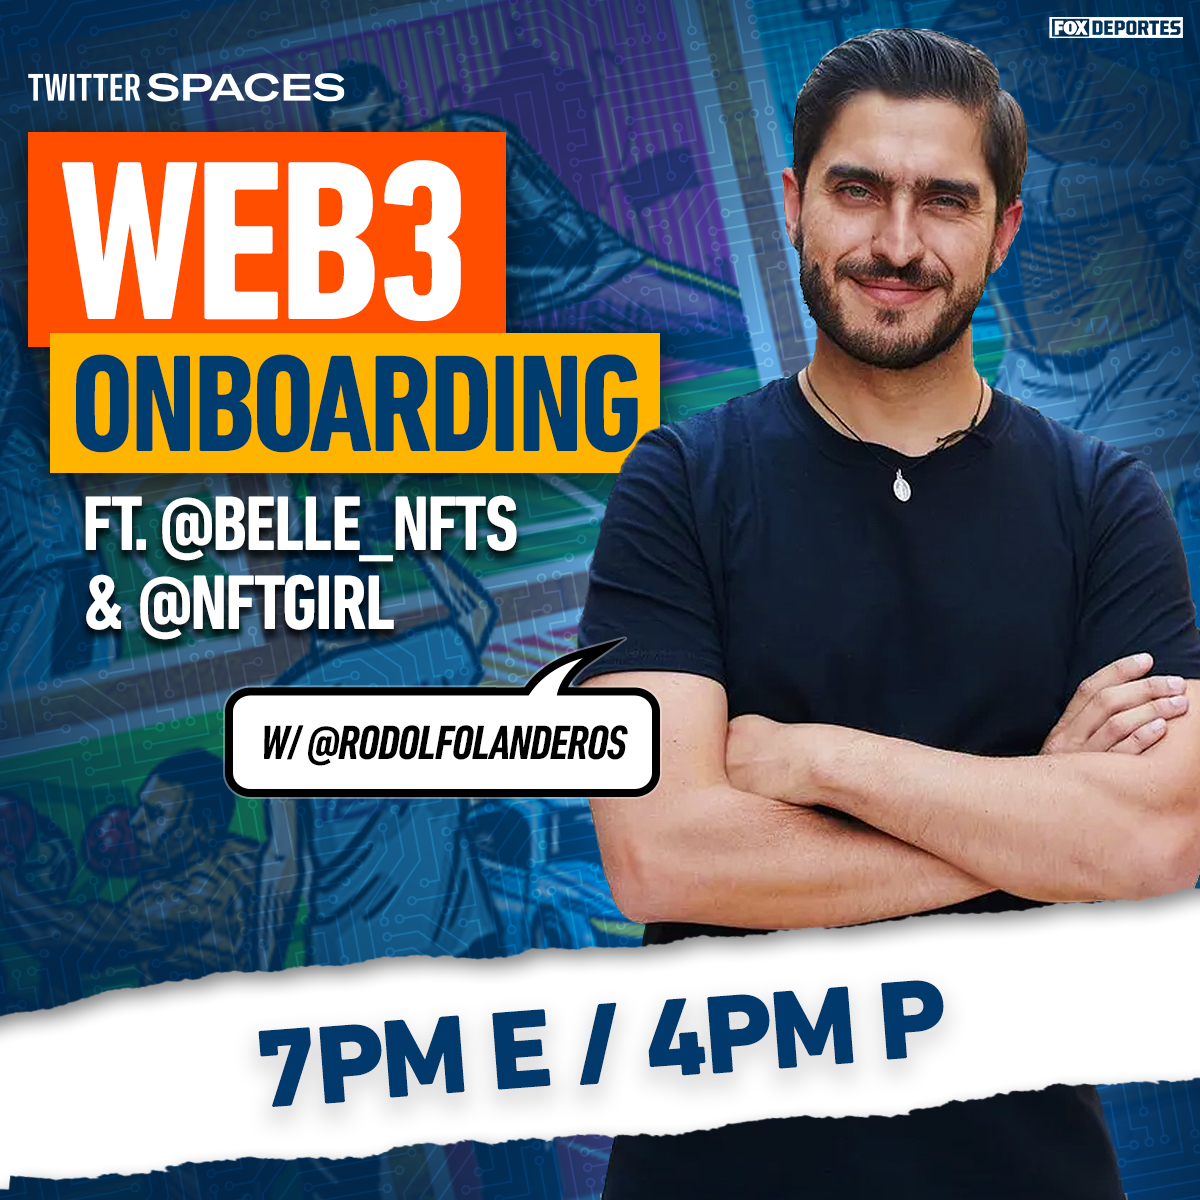 Set your reminders! 🚨 On Today's Twitter Space, @Belle_nfts and @NFTgirl will join us and chat about #Web3 onboarding. 🤓 Join us here 👉 twitter.com/i/spaces/1OdKr…